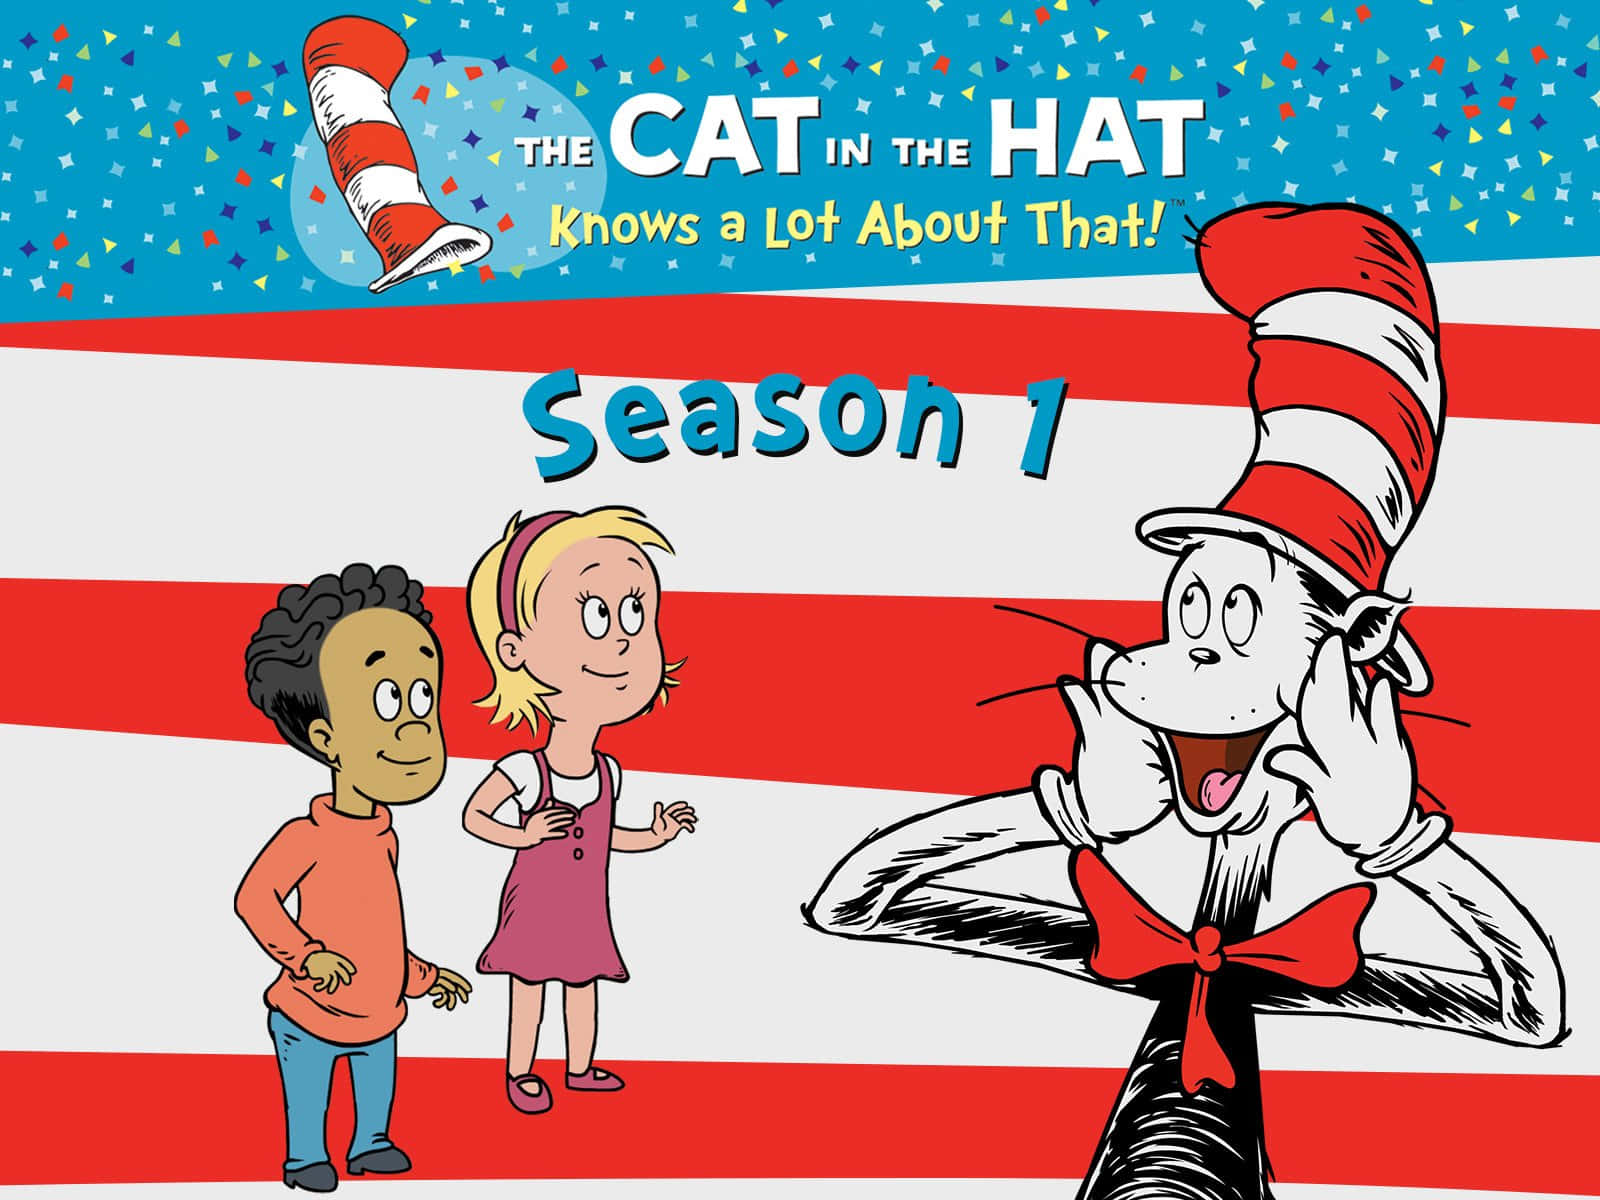 The Cat In The Hat Season 1